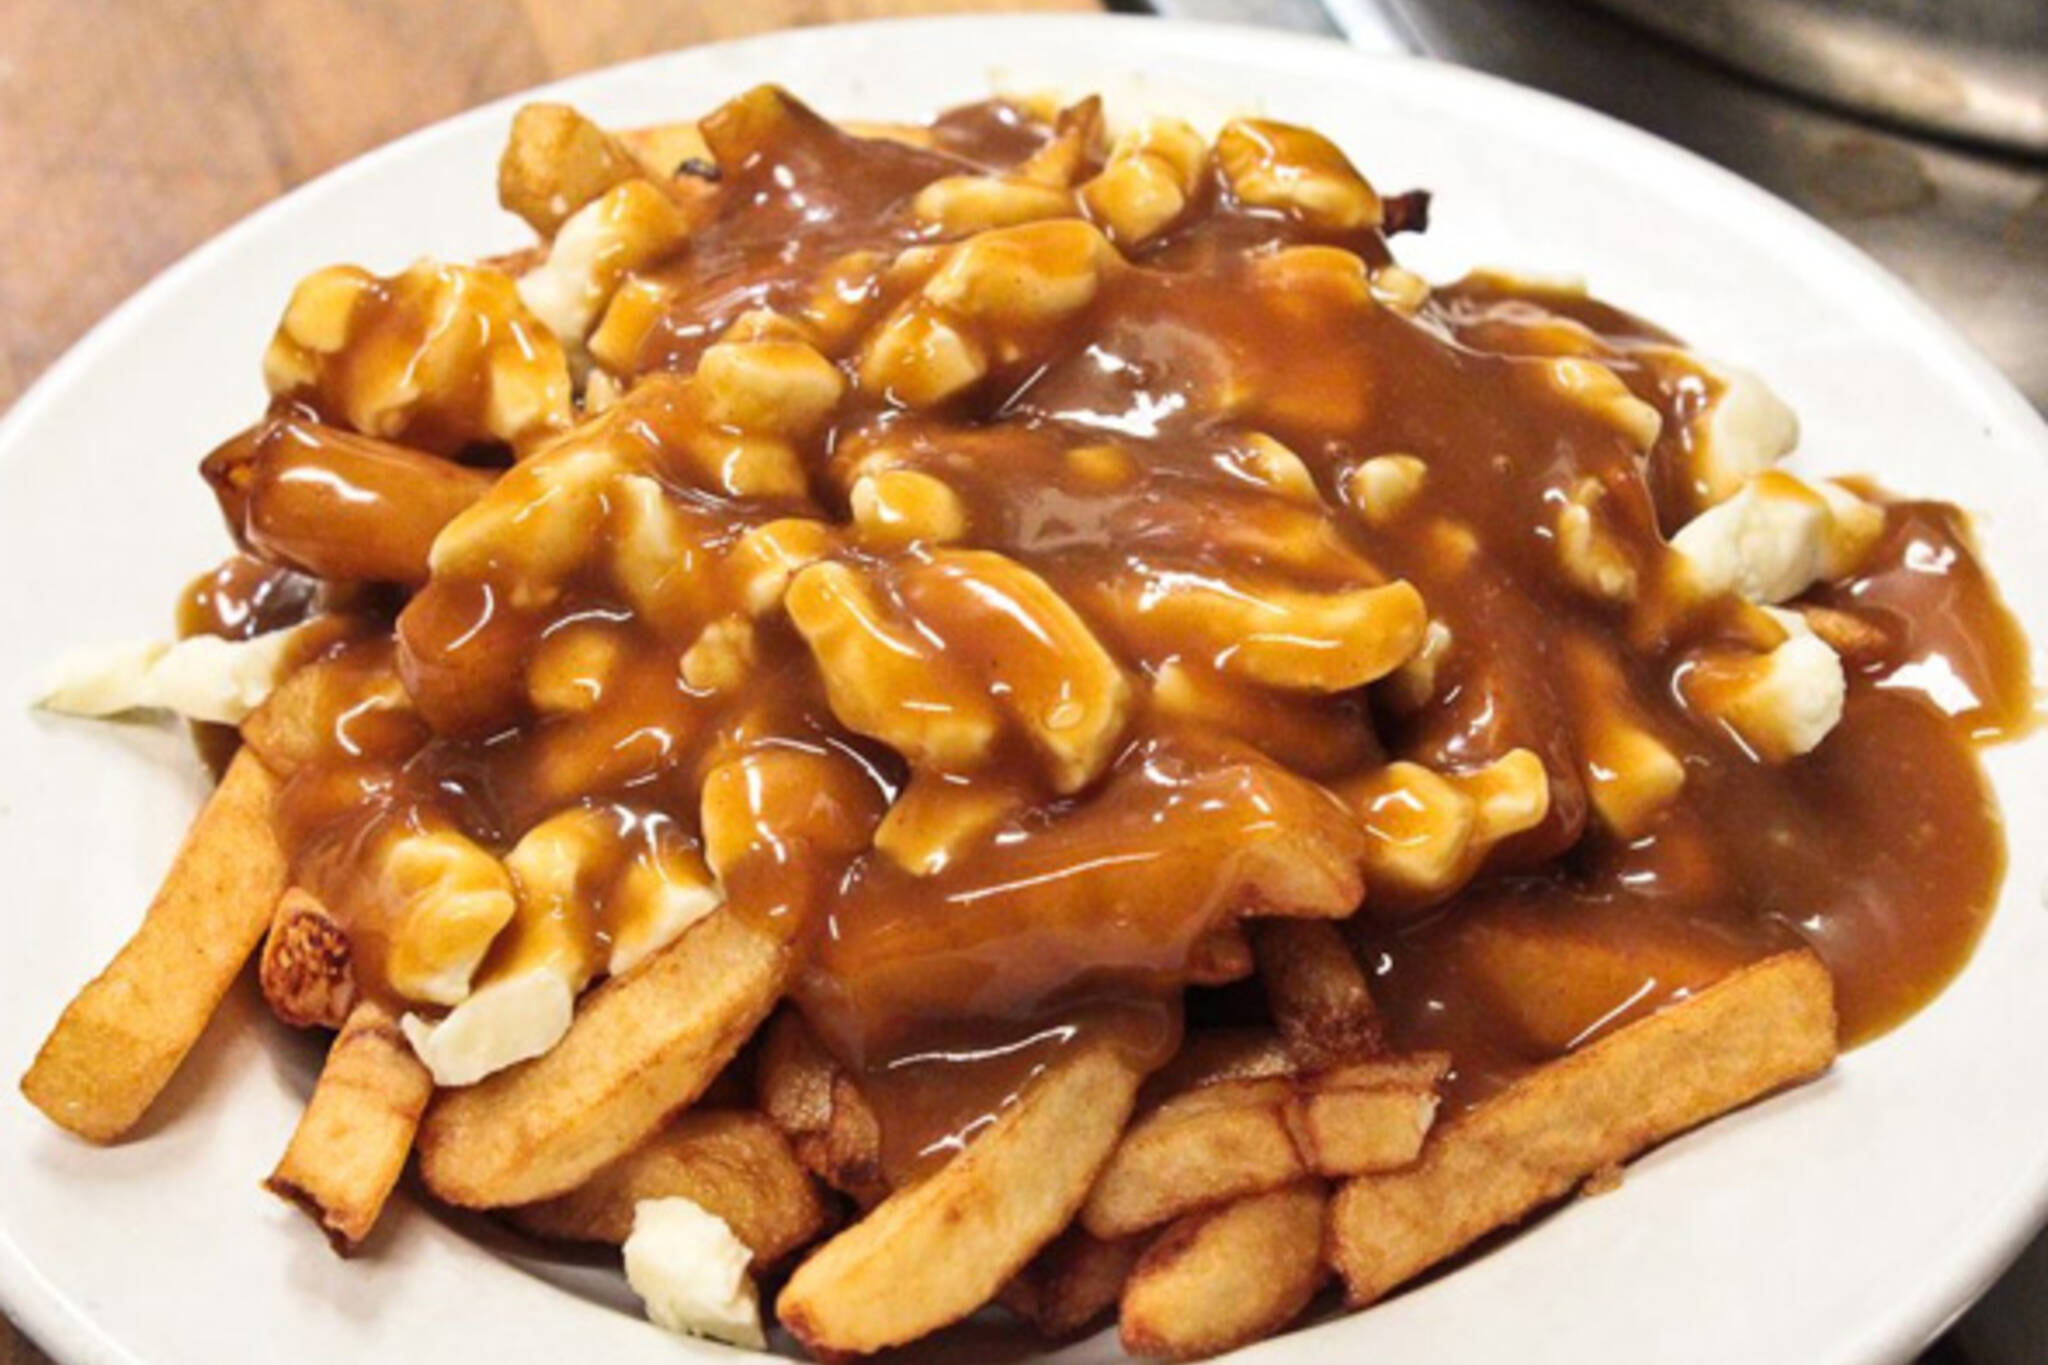 All you can eat poutine coming to Toronto